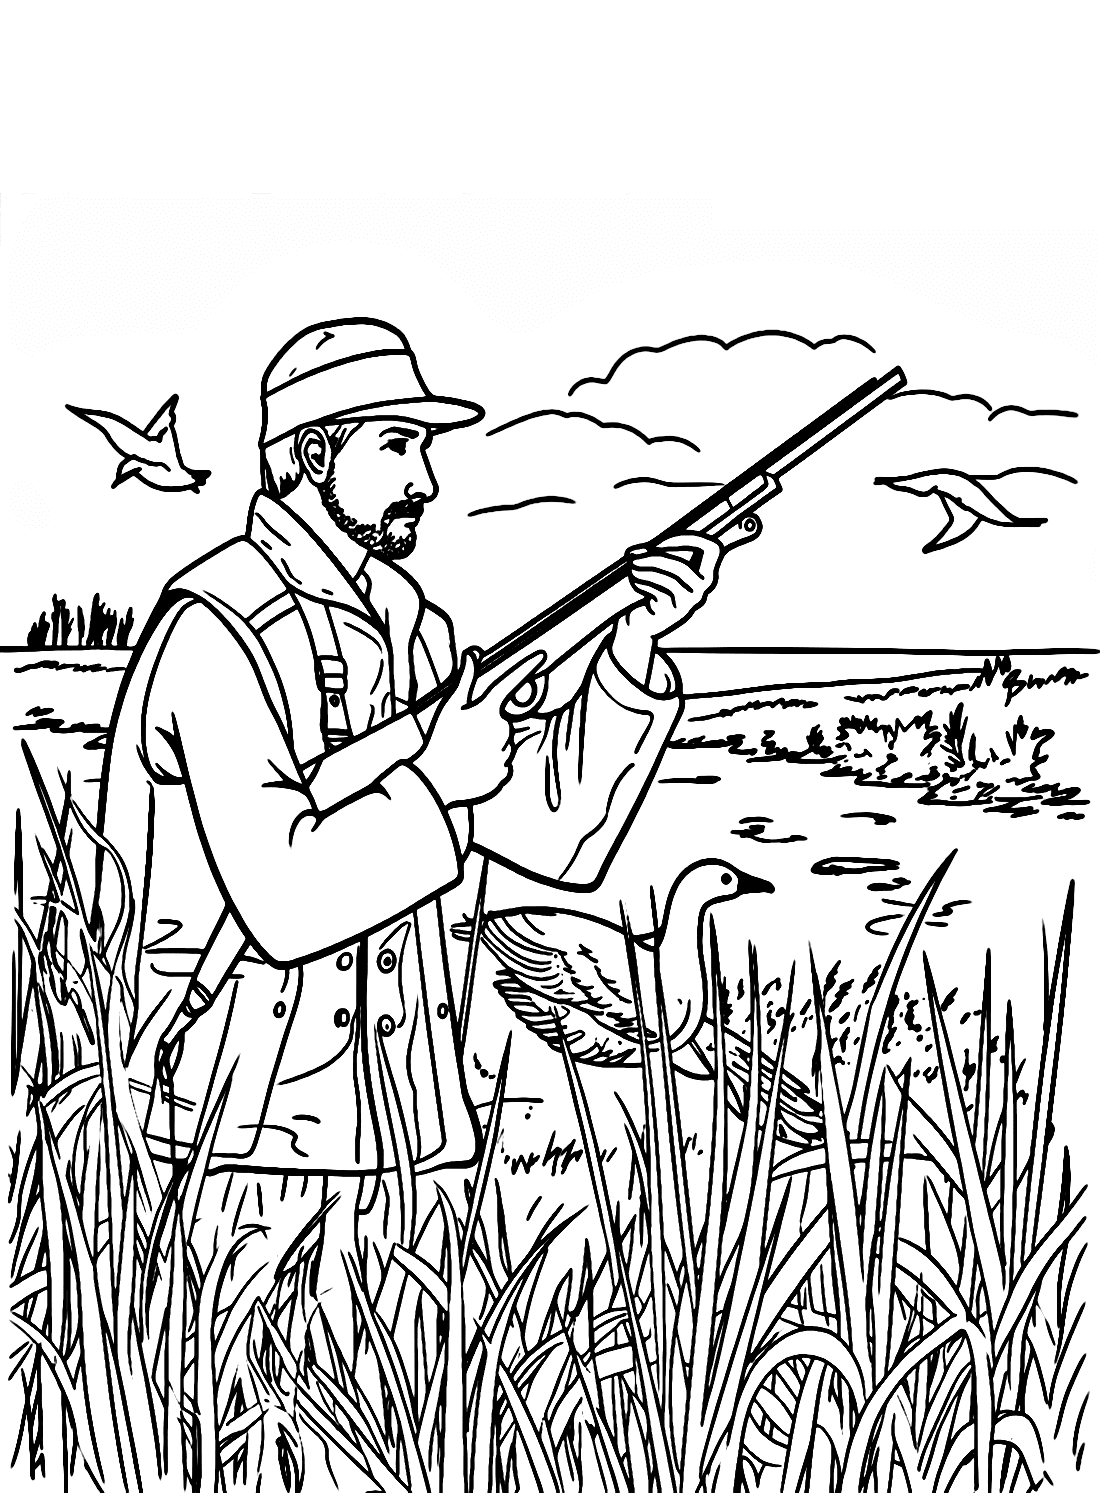 https://www.just-coloring-pages.com/wp-content/uploads/2023/06/man-hunting-ducks-in-the-field.png